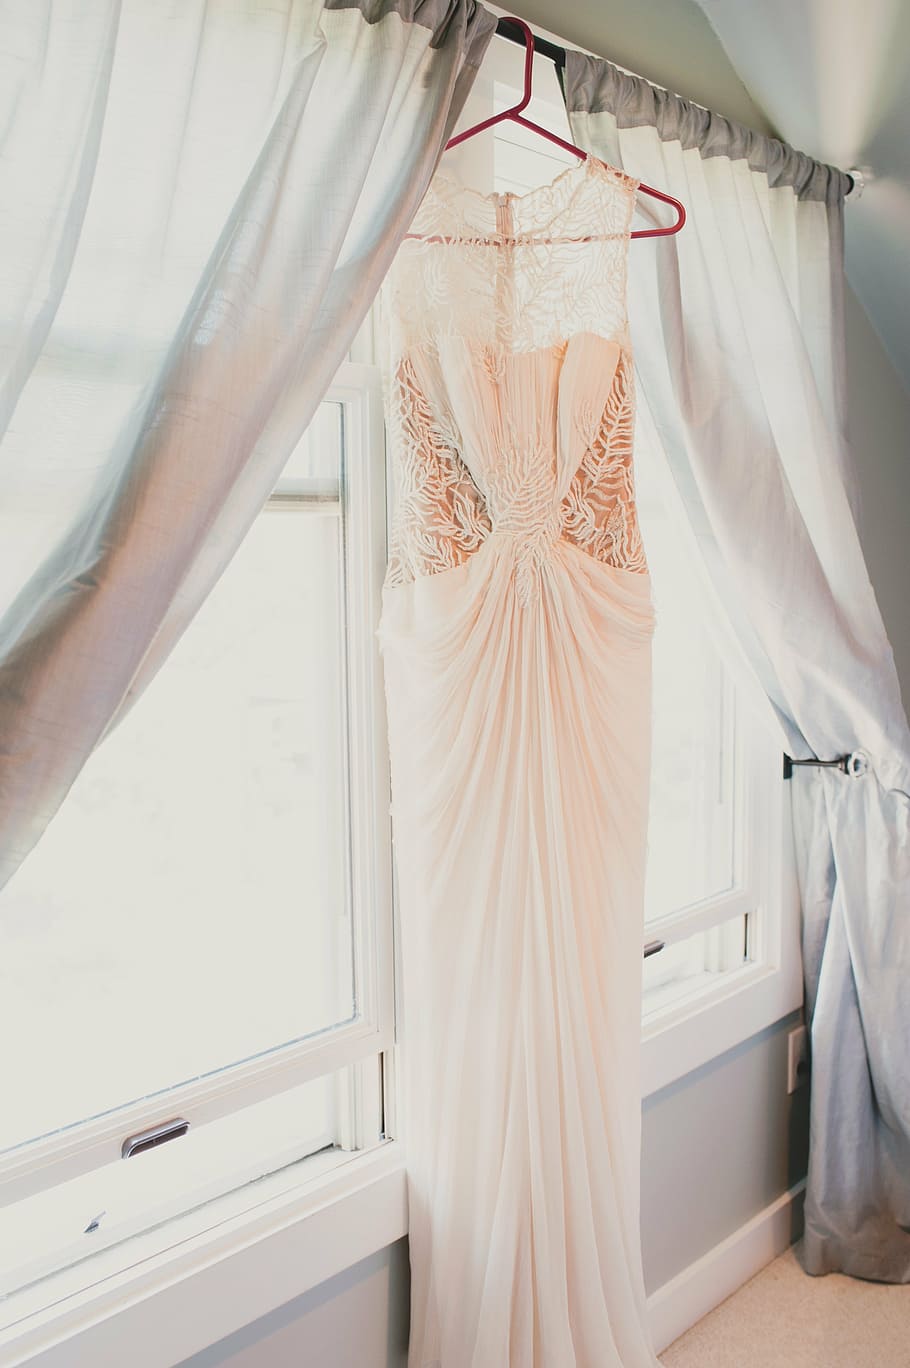 women, peach, white, sheer, illusion, sleeveless, sweetheart, necklace, gown, the wedding dress